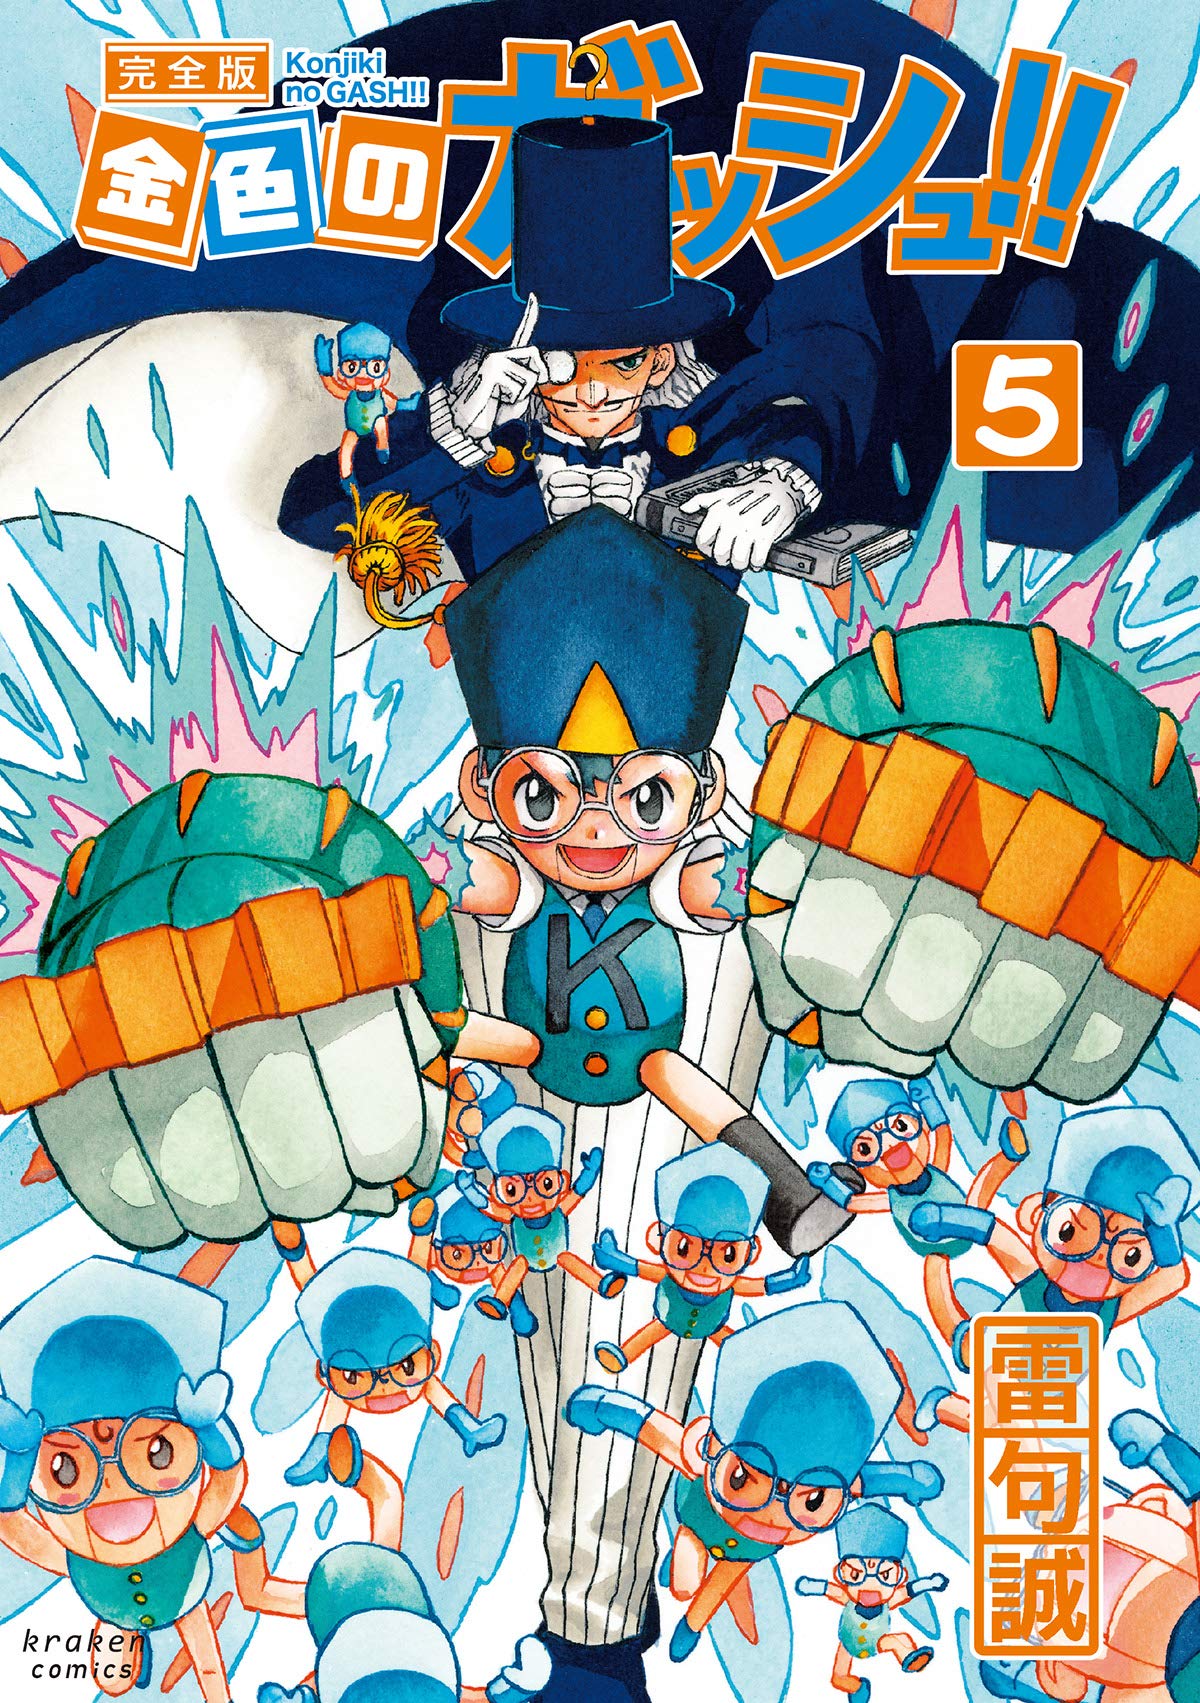 The cover for vol 1. of the brazilian release of the Gash Bell